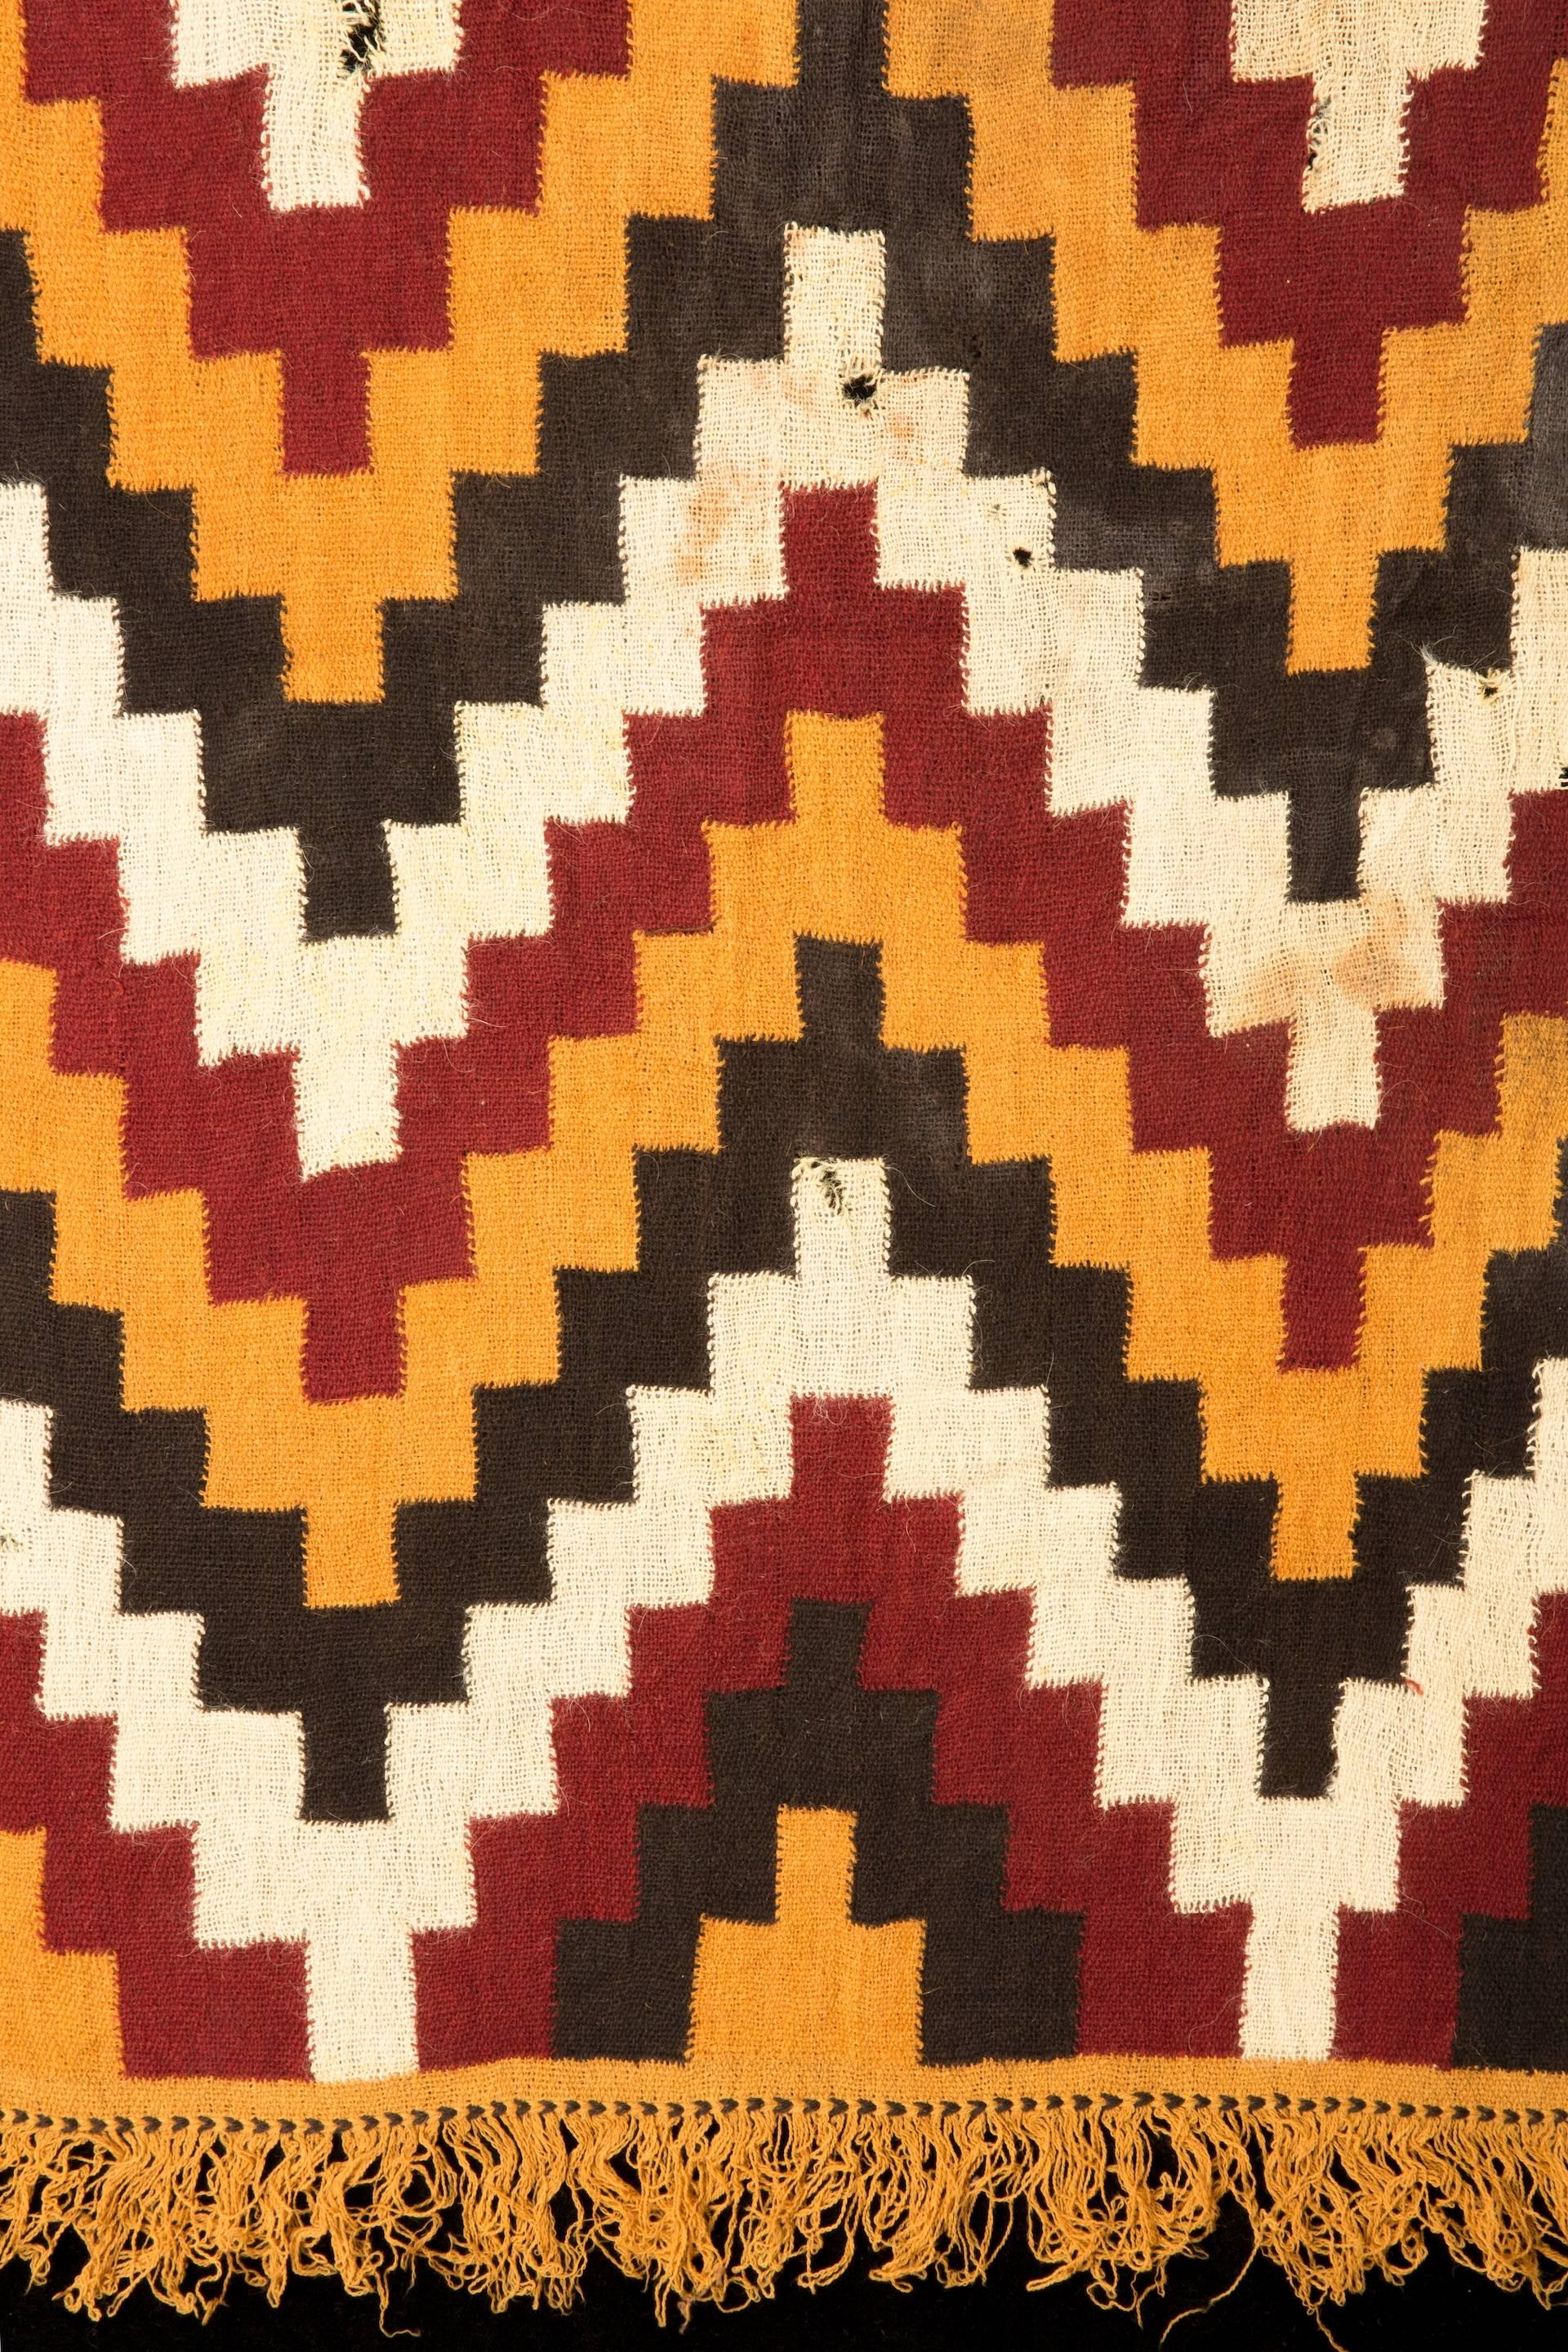 Complete textile panel with zig-zag patterns in white, yellow red and black or brown shades.